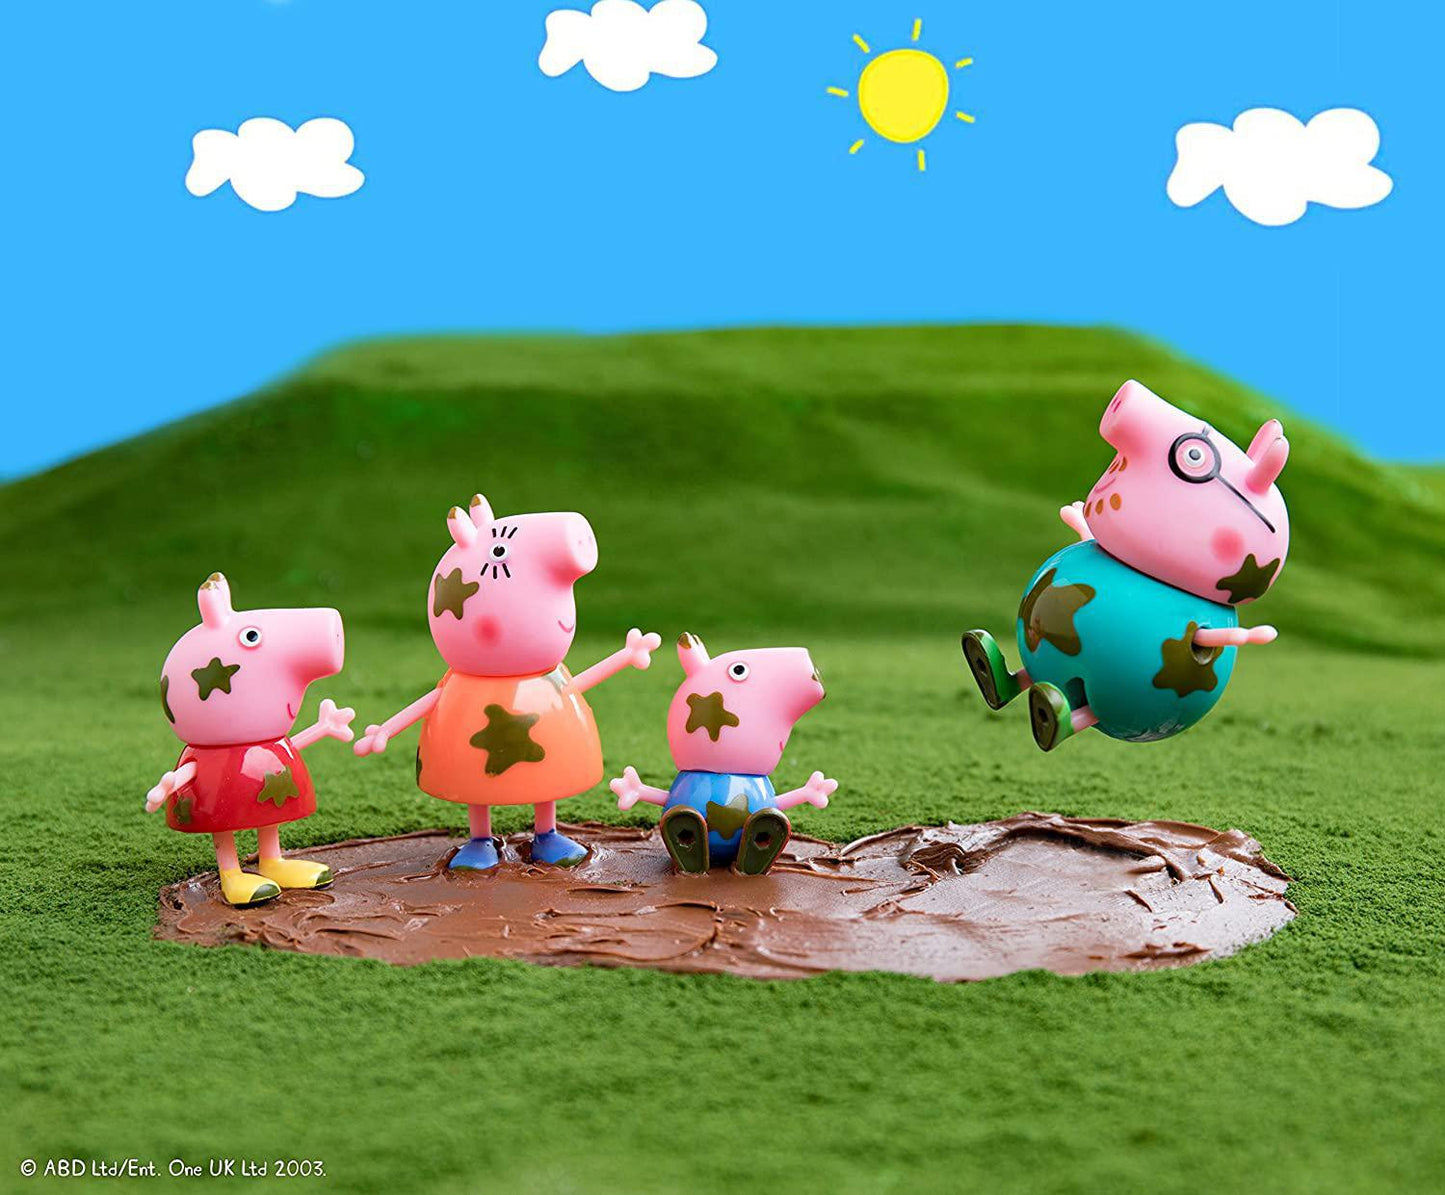 Peppa Pig Muddy Puddles Family 4-Figure Pack, Includes Peppa Pig, brother George, Mummy Pig, and Daddy Pig